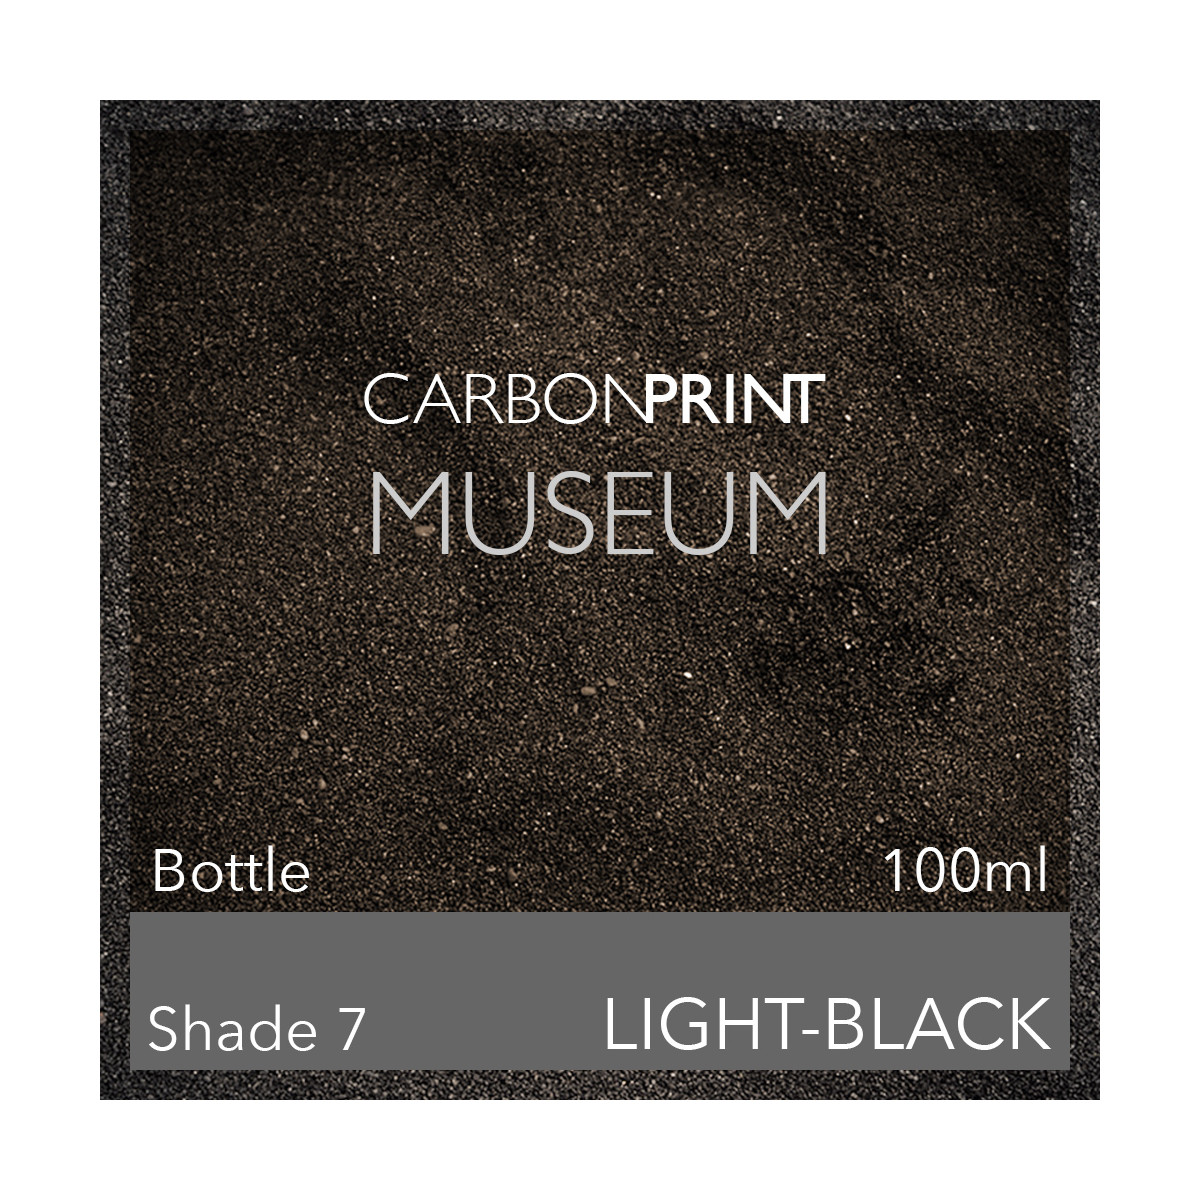 Carbonprint Museum Shade7 Channel LK / GY 100ml